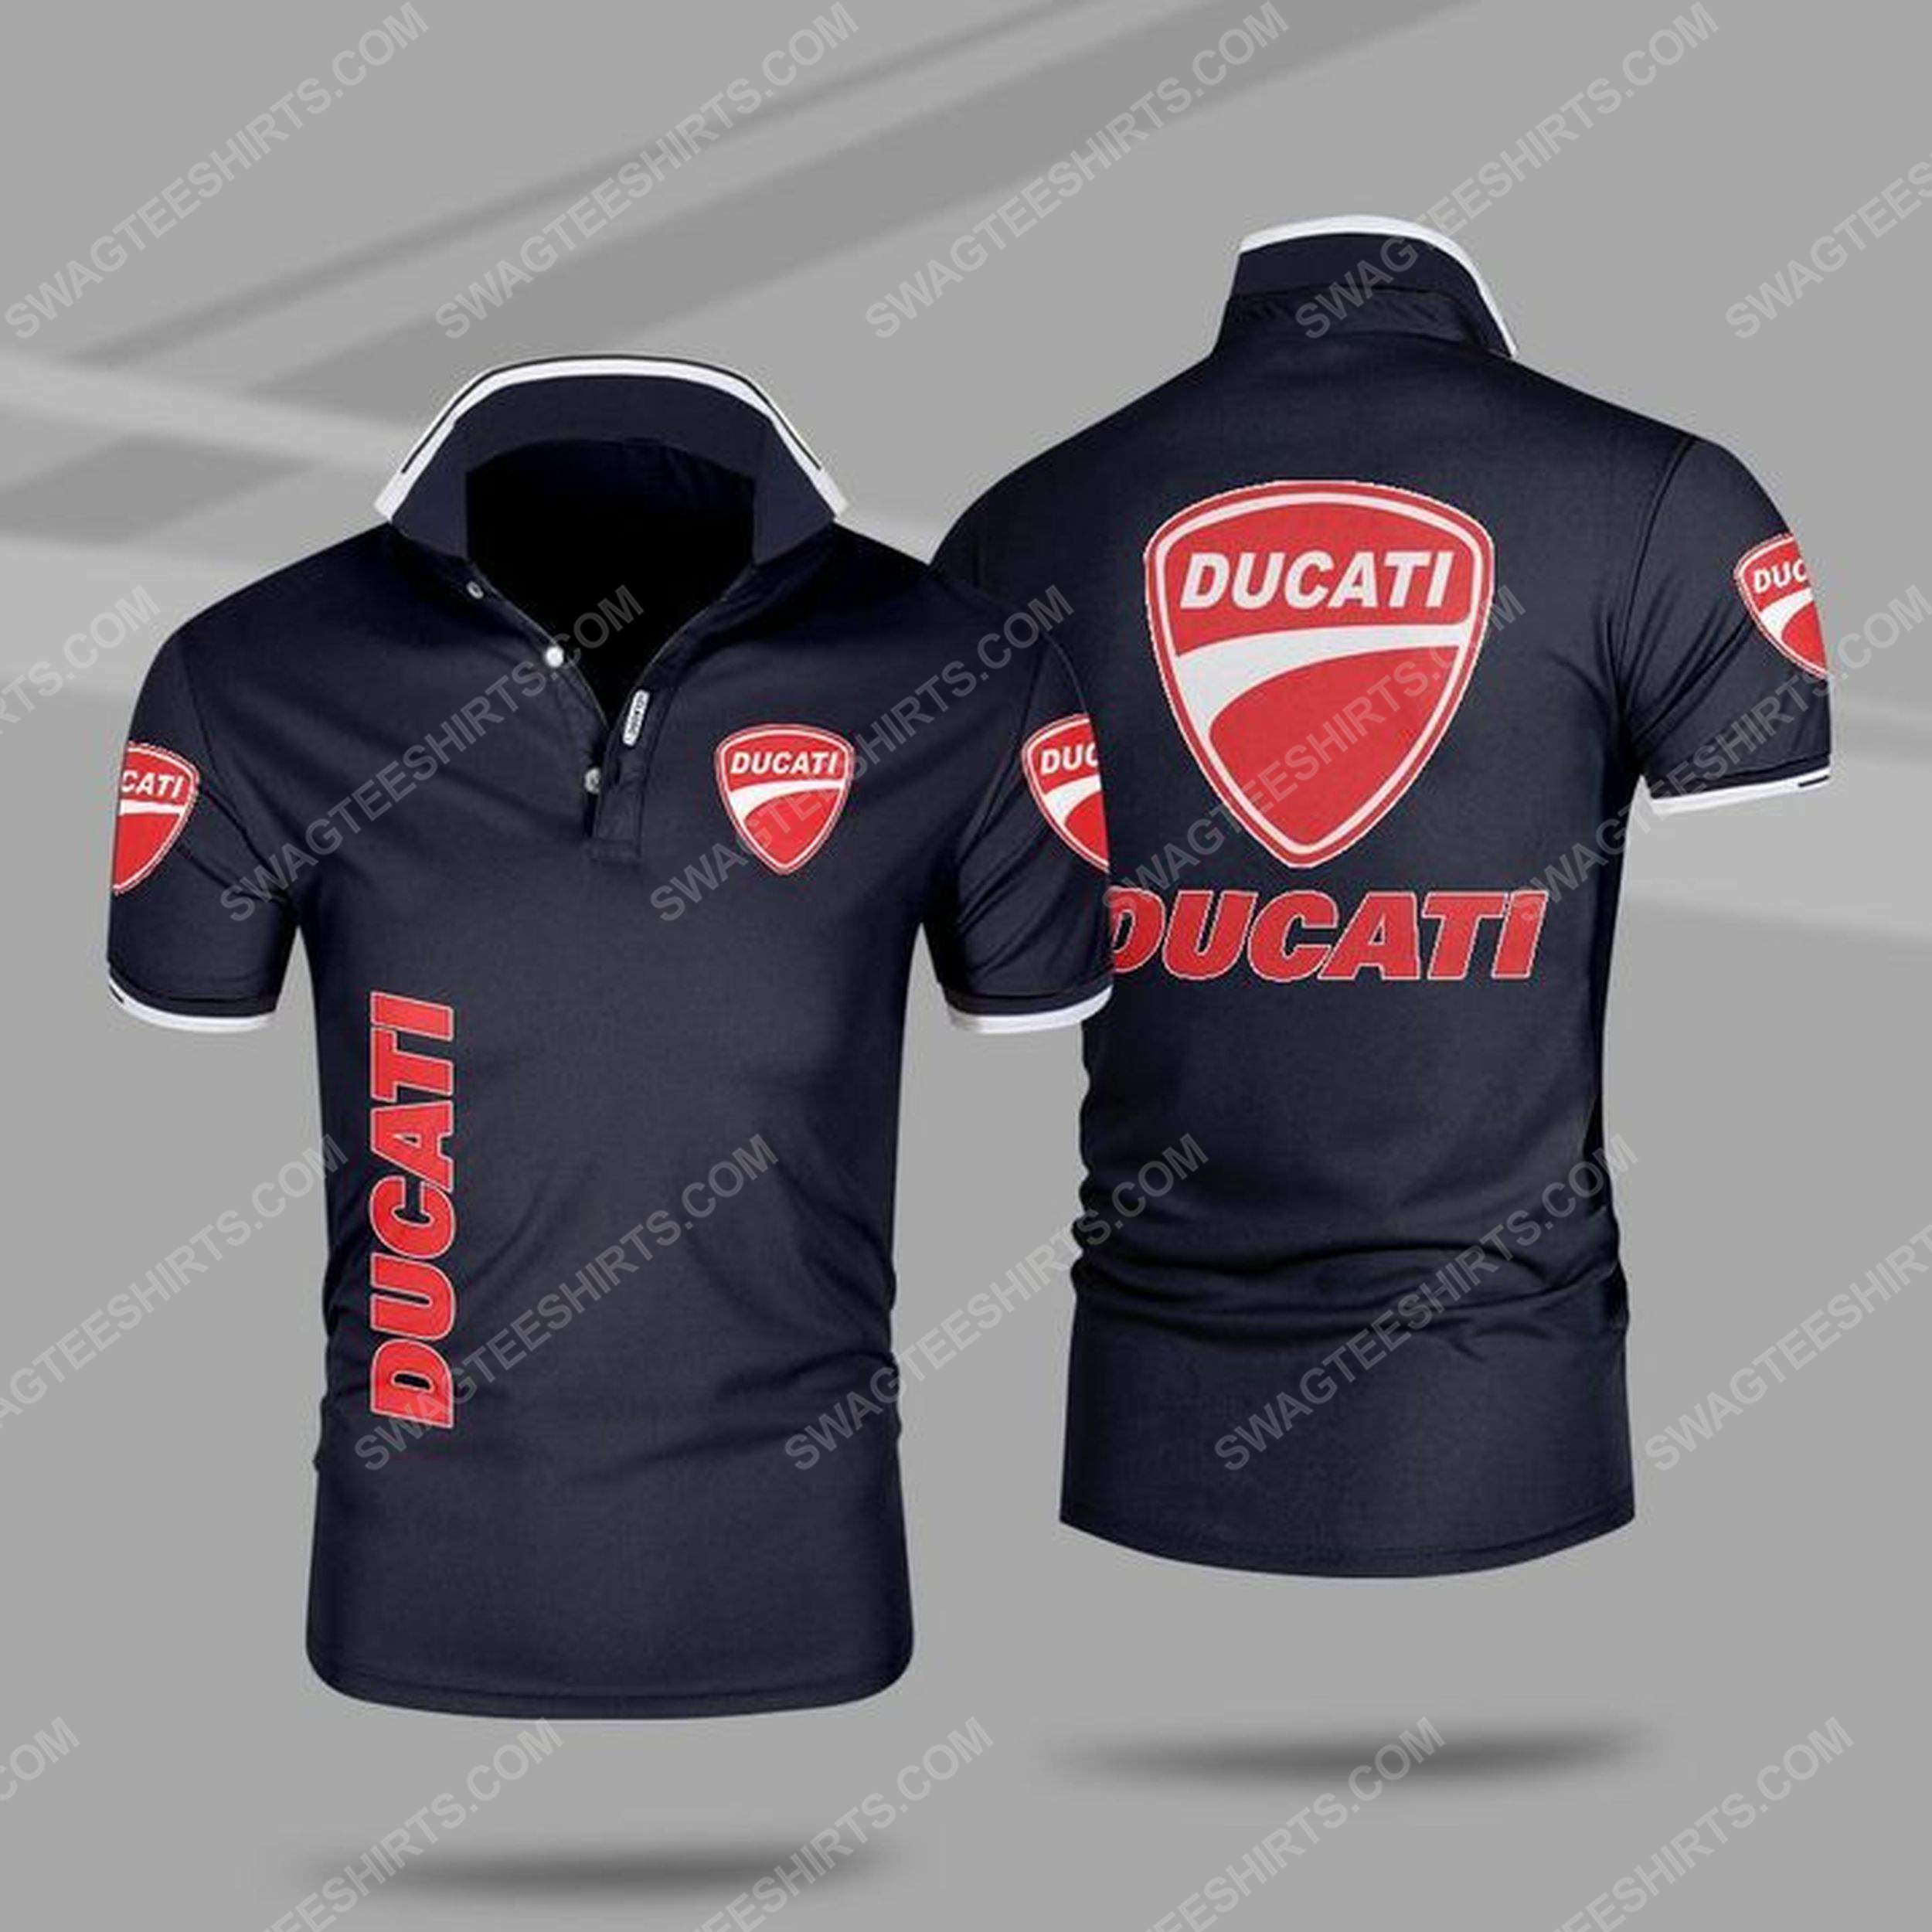 The ducati motorcycles all over print polo shirt - navy 1 - Copy